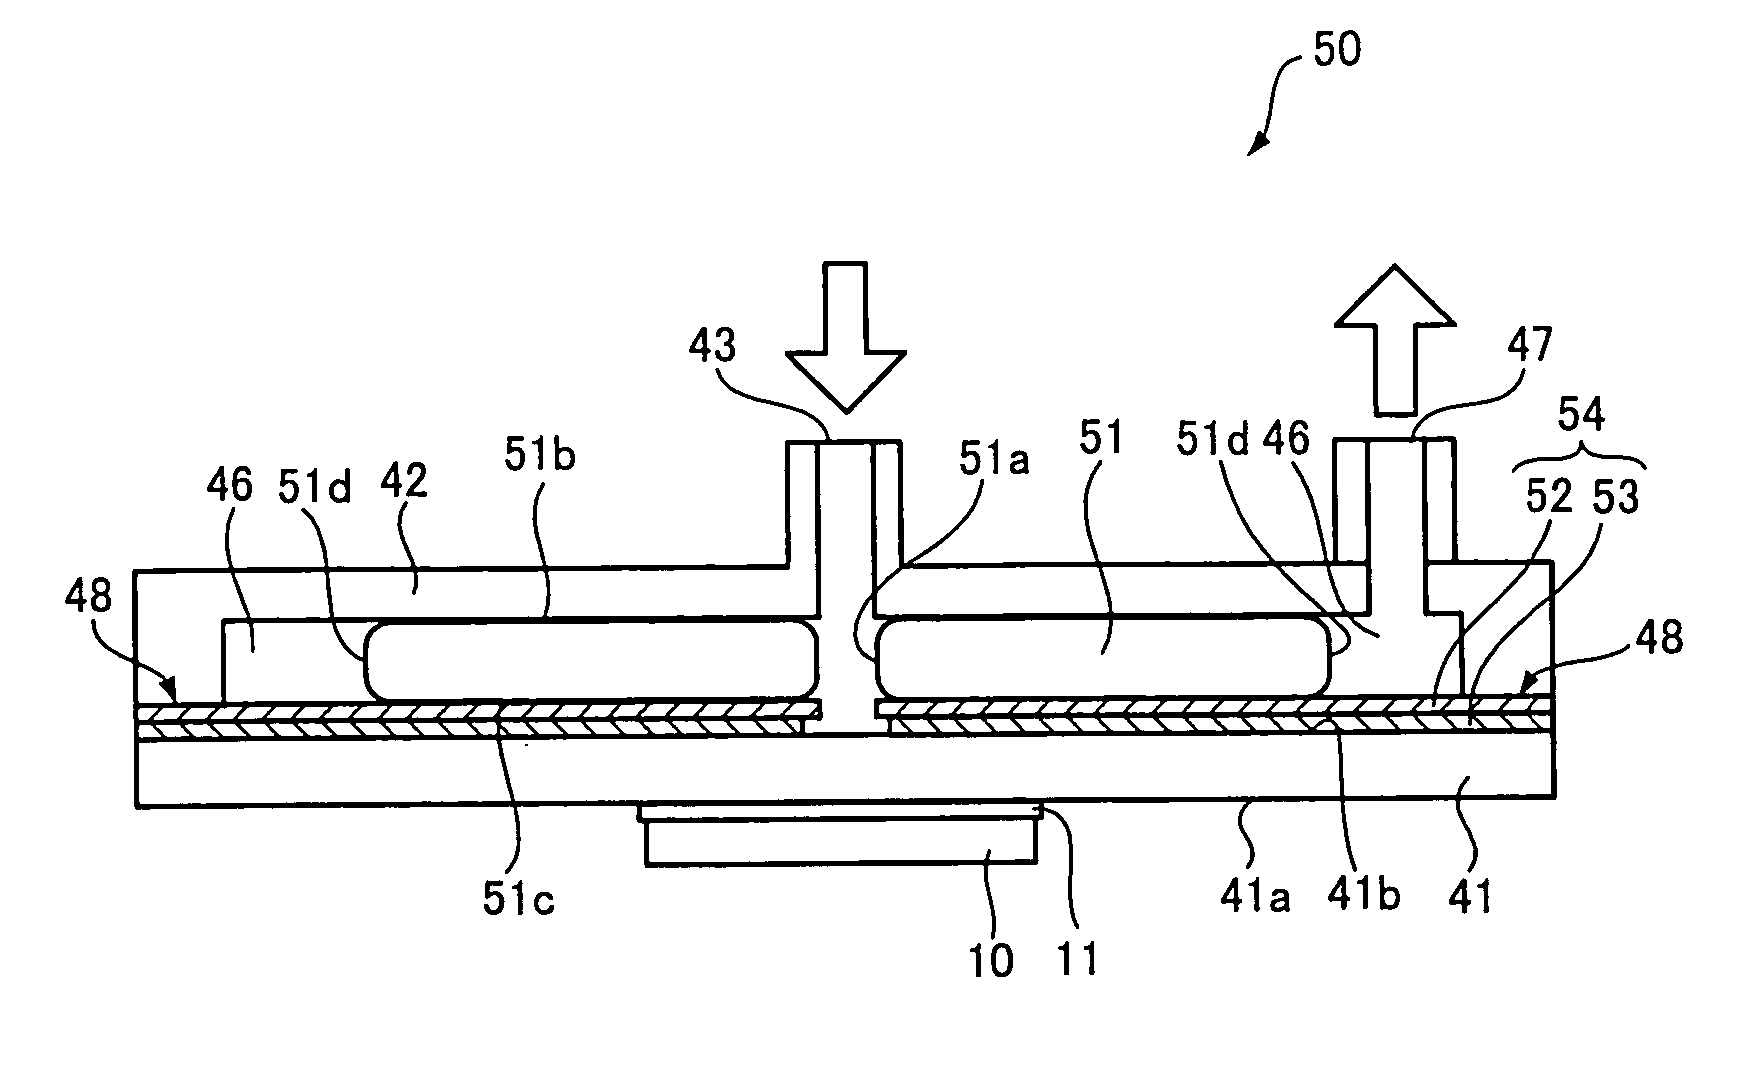 Semiconductor device cooling apparatus